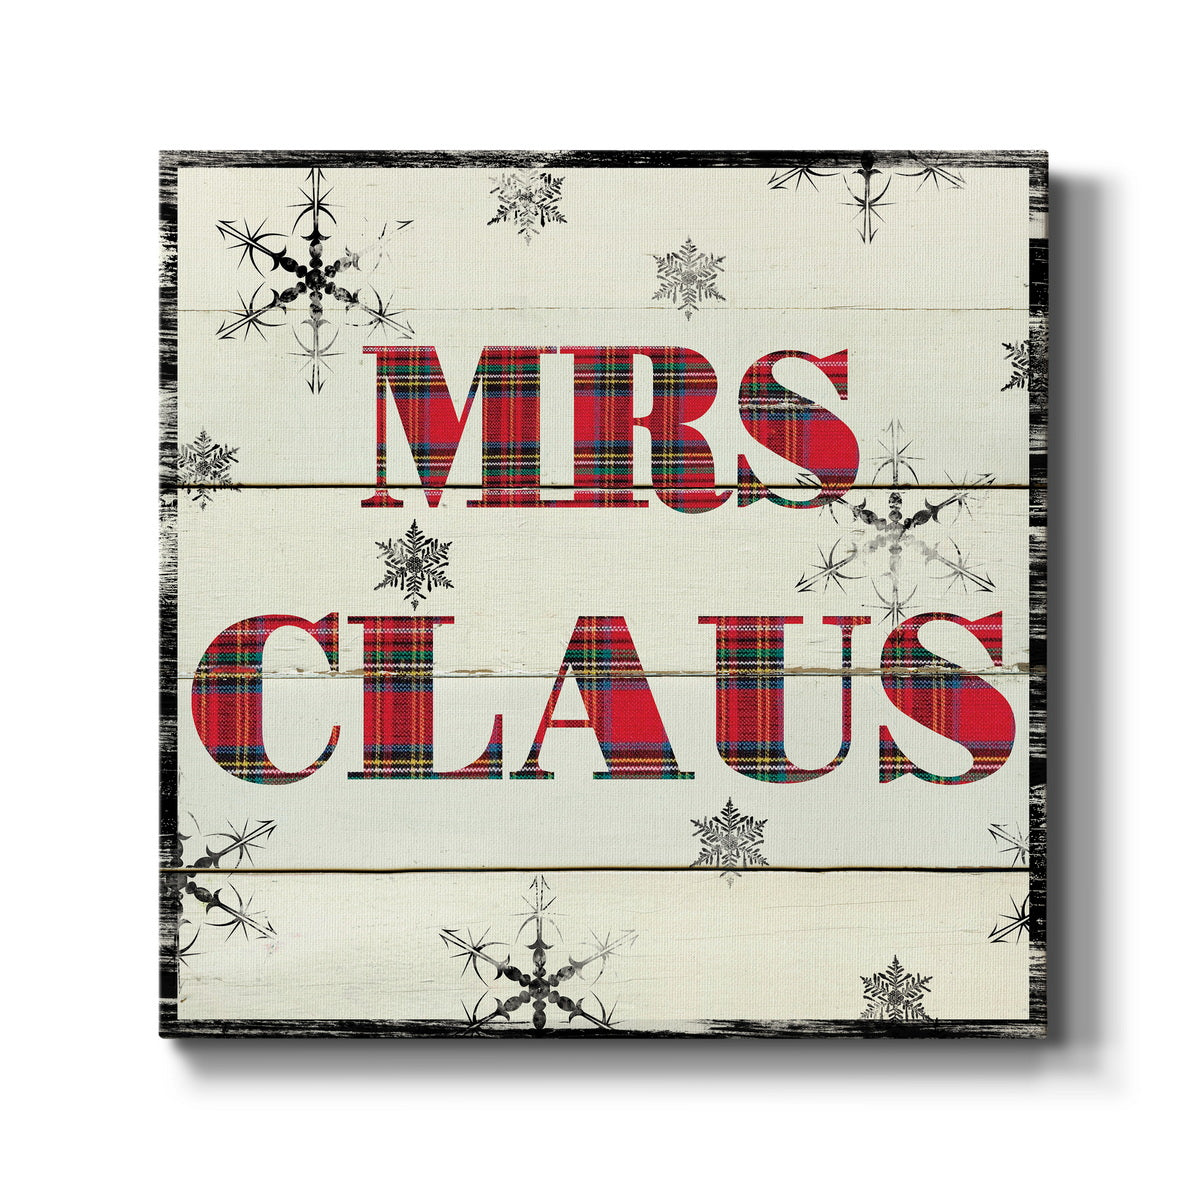 Mrs. Claus-Premium Gallery Wrapped Canvas - Ready to Hang